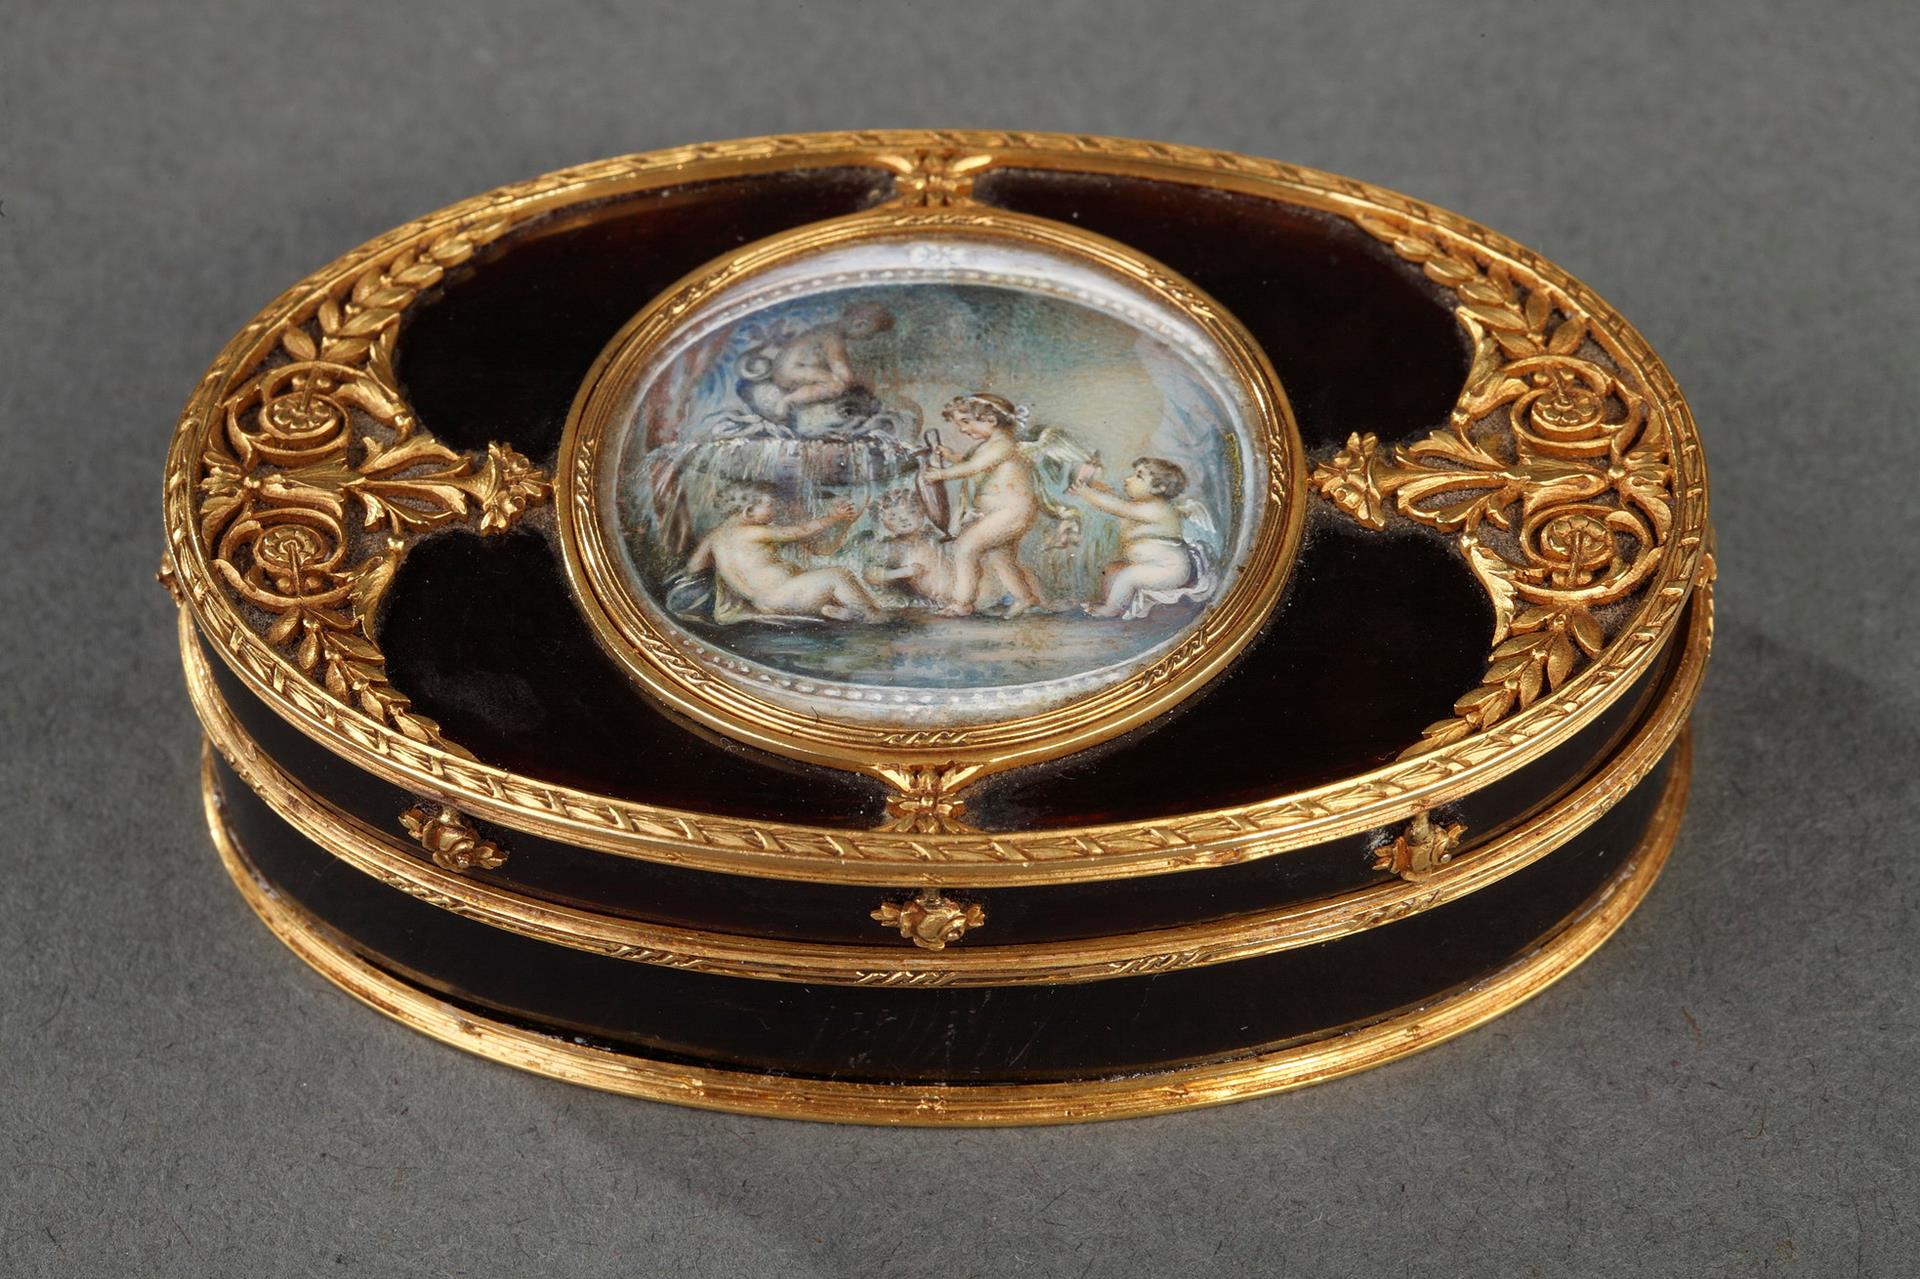 tortoiseshell and Gold Box with Miniature on Ivory.<br>Late 18th century. 